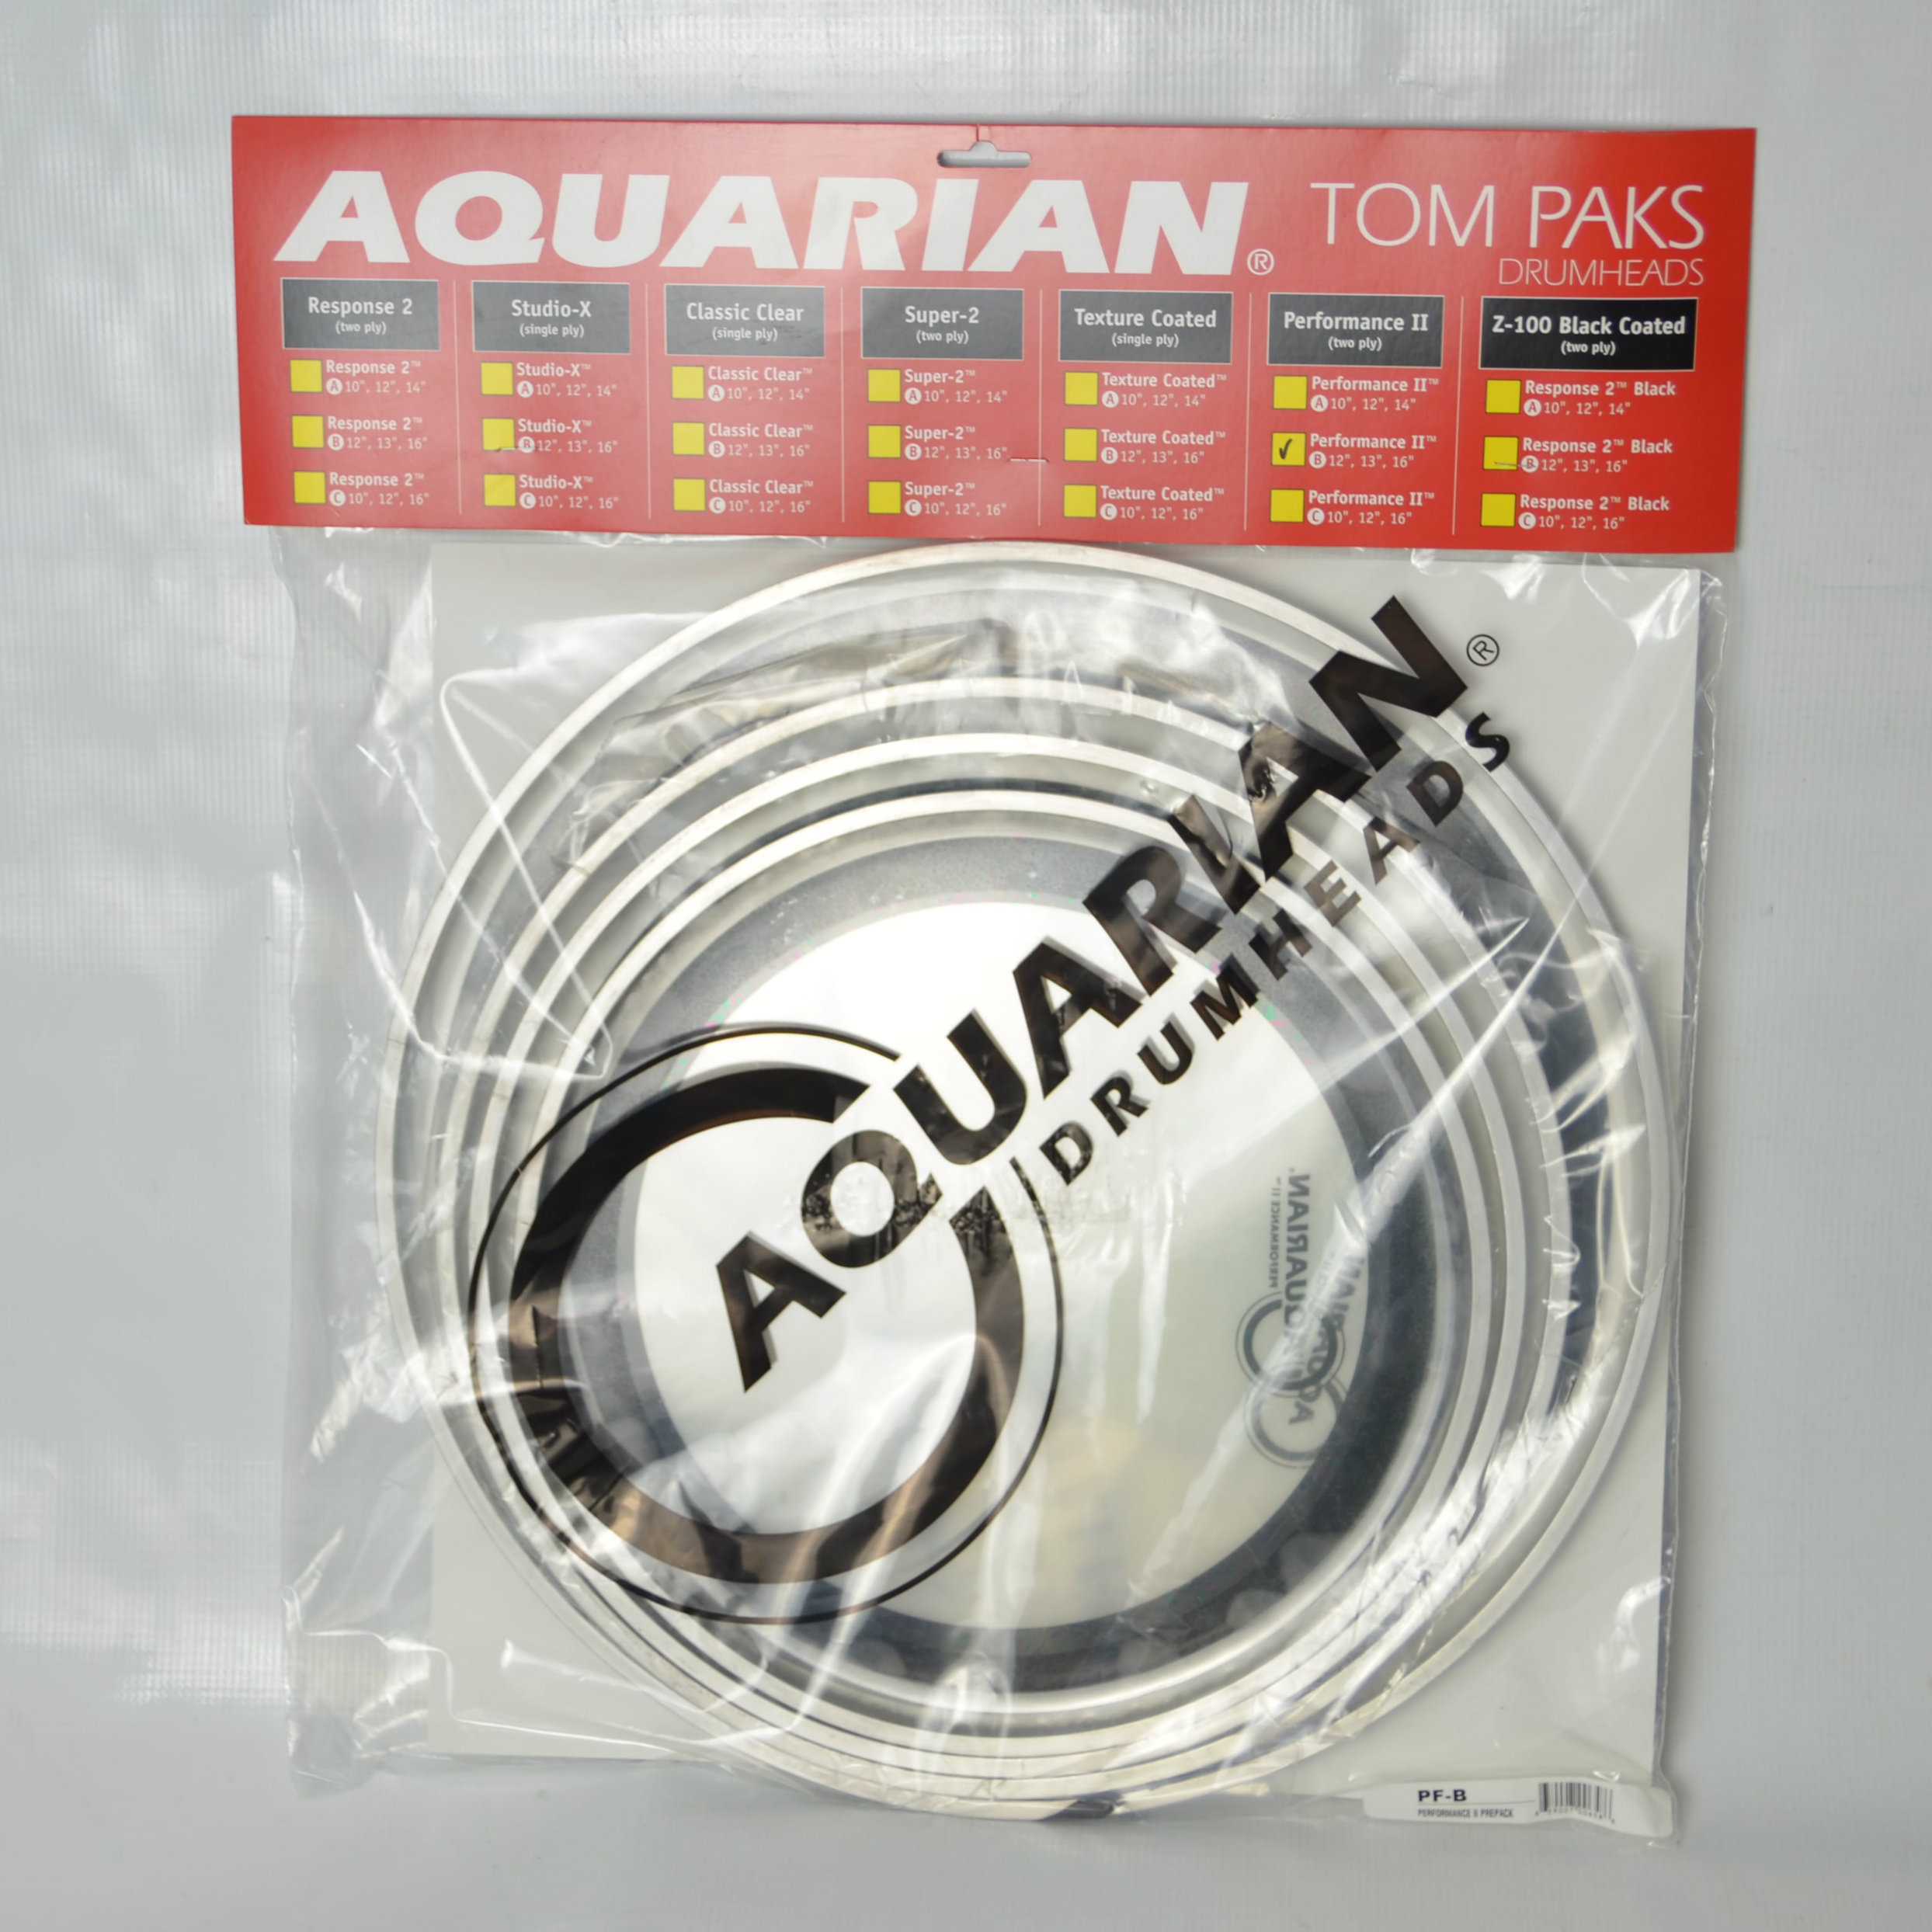 Aquarian Drumheads packed